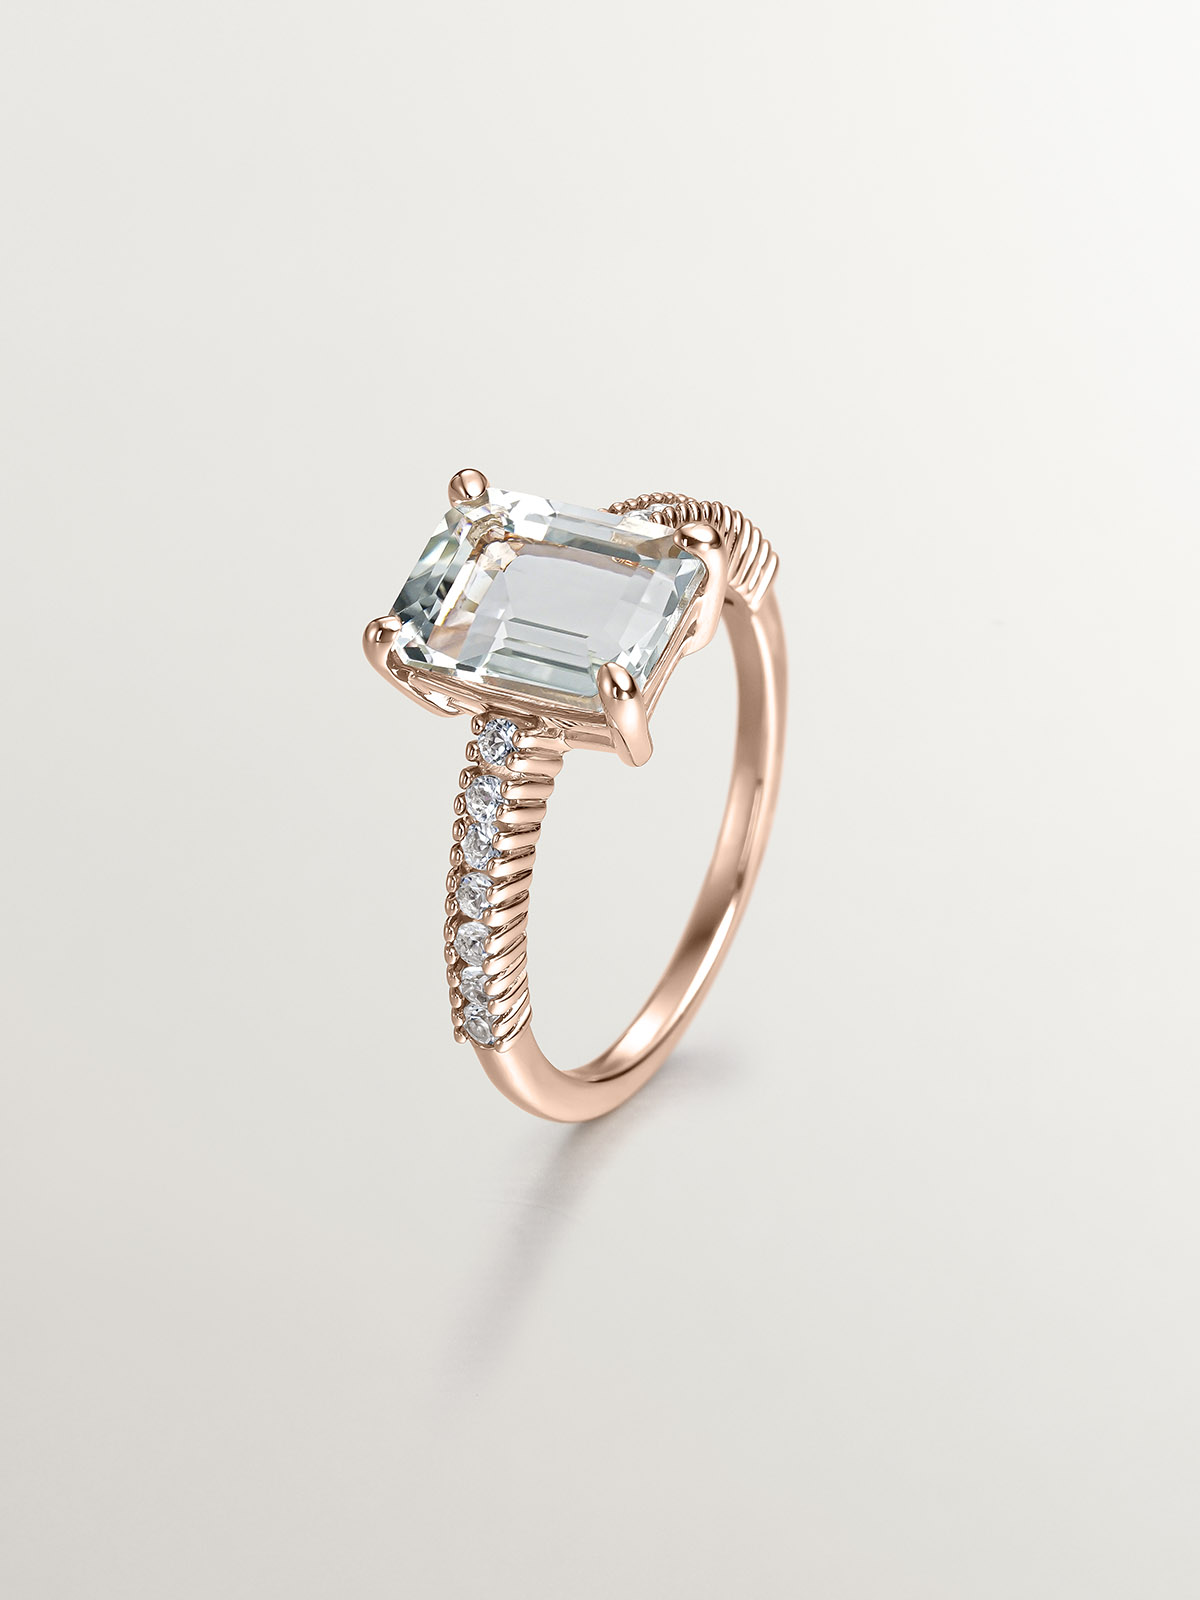 925 Silver ring bathed in 18K rose gold with green quartz and white topaz.